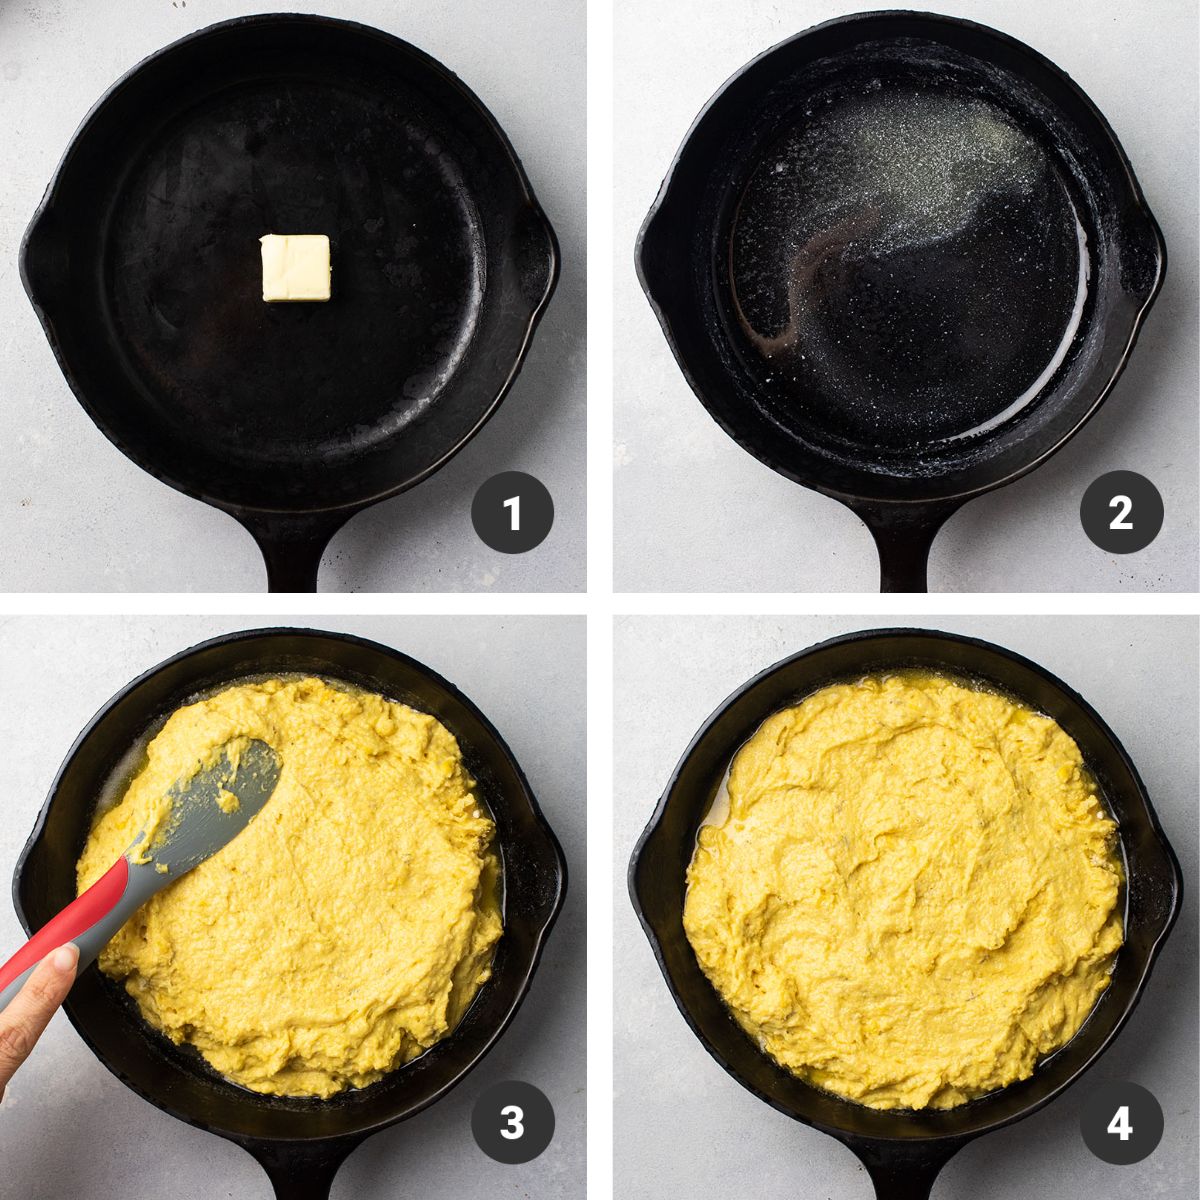 Spreading cornbread batter into cast iron skillet with a red spatula.